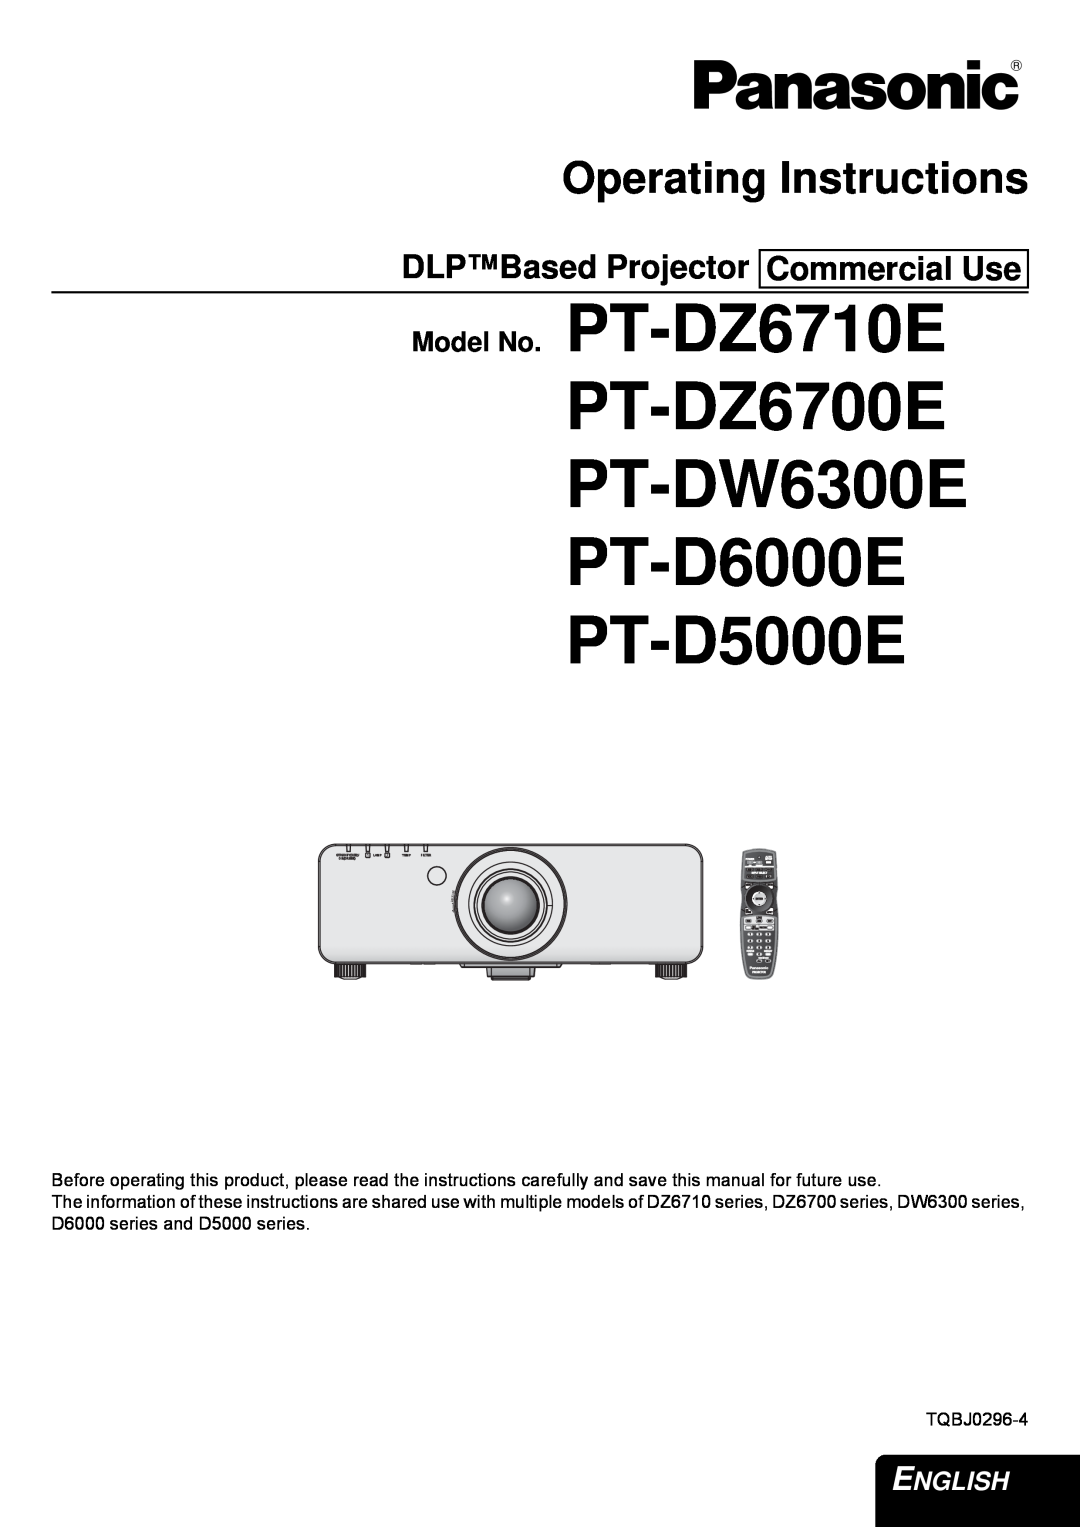 Panasonic manual DLPBased Projector Commercial Use, PT-DZ6700E PT-DW6300E PT-D6000E PT-D5000E, Operating Instructions 